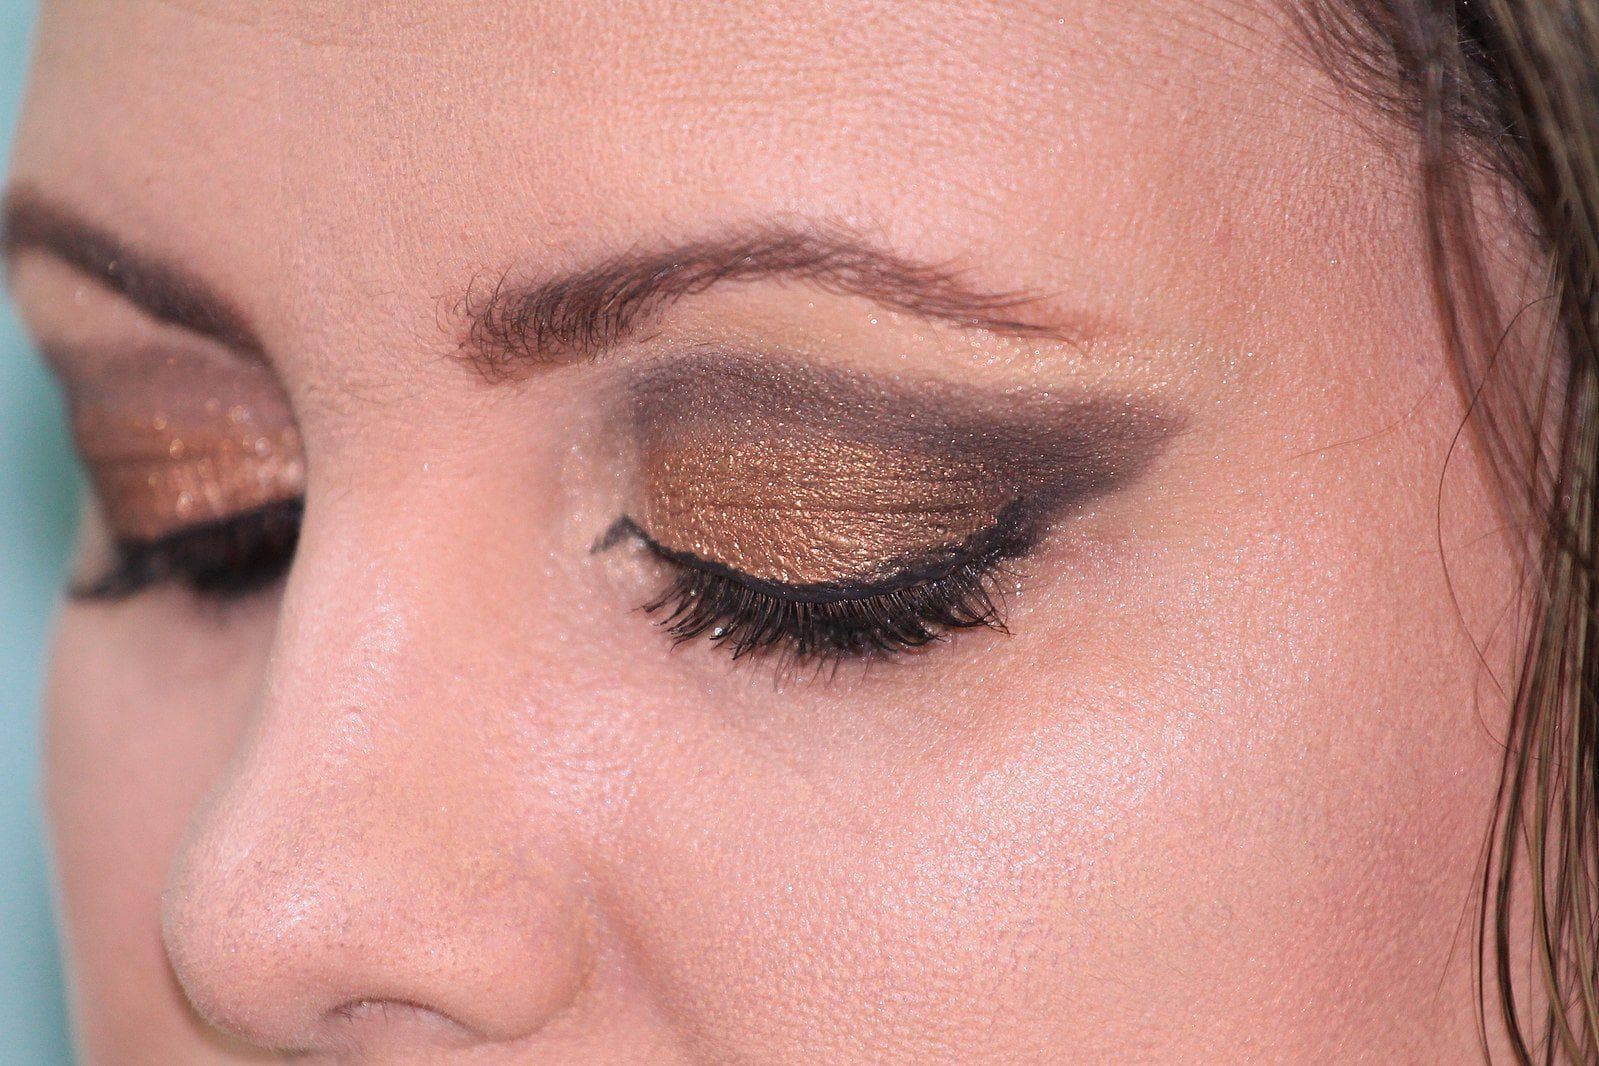 Random Makeup Mistakes Are Aging You And You Don't Even Realize It